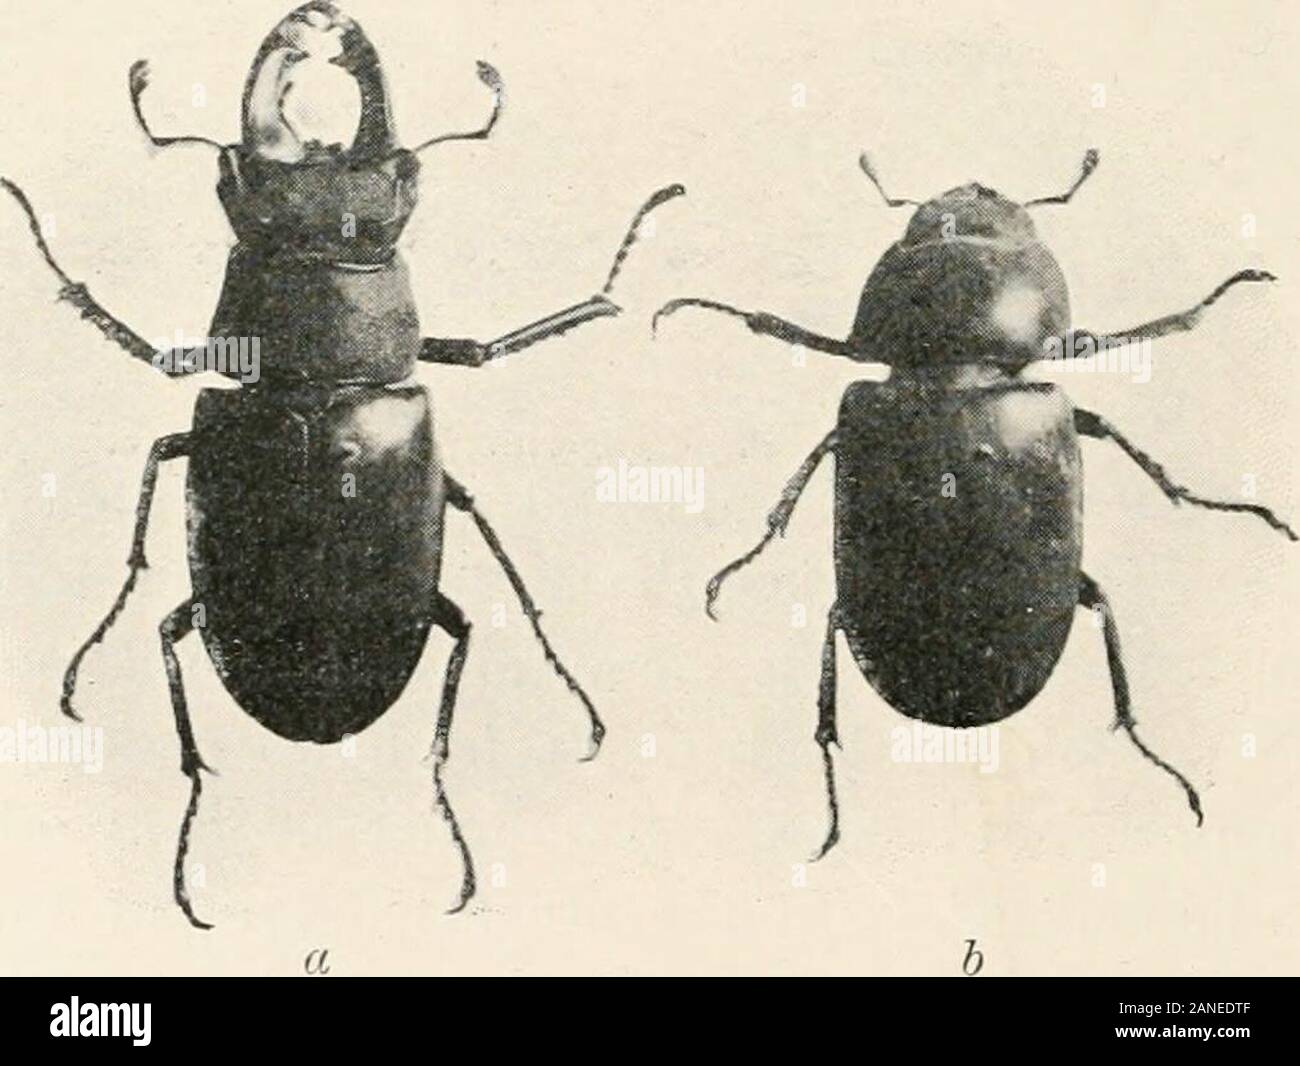 Forest entomology . re, the student would do well torefer to figs. 41 and 42, together with the explanation as given by1 Rye, British Beetles, p. 41. 42 FOREST ENTOMOLOGY. Fowler. These points should be thoroughly mastered, as the readydiscrimination of species from a systematic point of view will dependupon the same. Family LUCANID.E. Fowler says that the three British genera of the Lucanidae maybe distinguished as follows :— I. Eyes more or less divided ; ligula and maxillae covered by thementum ; antennae geniculate ; posterior femora extendingbeyond margin of elytra.1. Eyes divided for sca Stock Photo